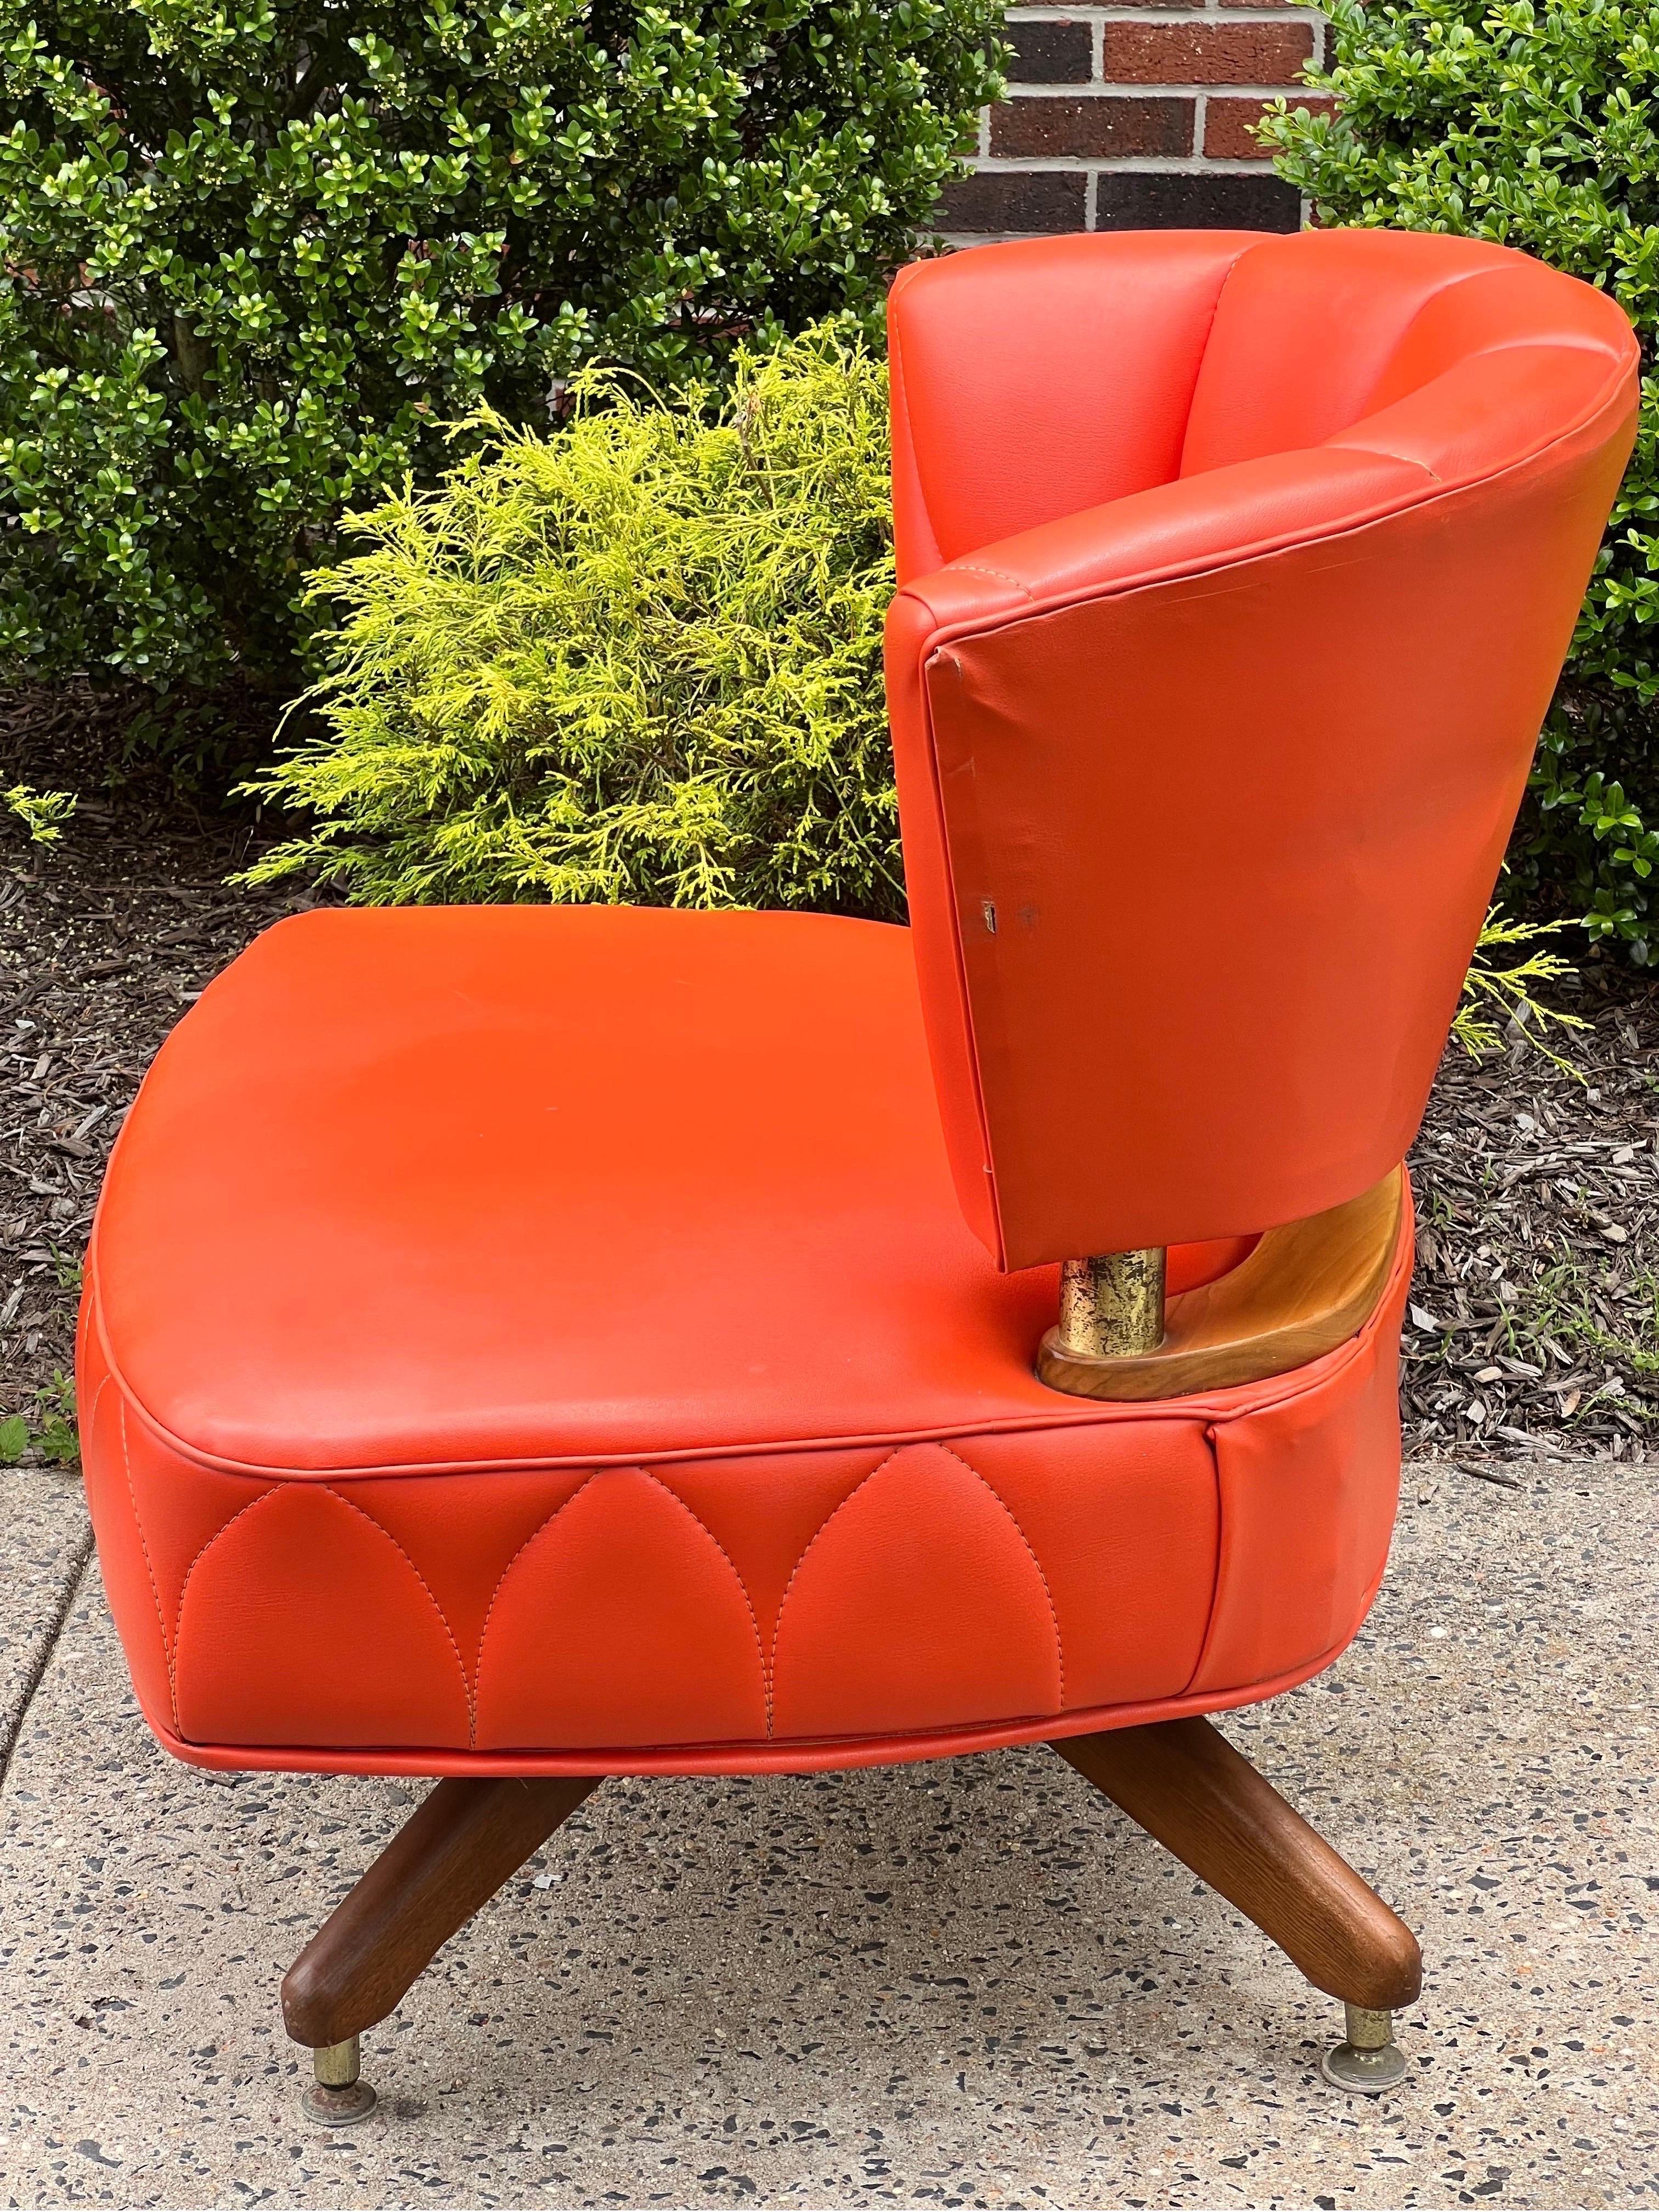 Fabulous vintage swivel slipper chair by Kroehler, 1962.

A beautiful chair upholstered in a vibrant shade of tangerine orange faux leather with unique stitching pattern detail. The upholstery color has maintained its vitality and has no fading. A